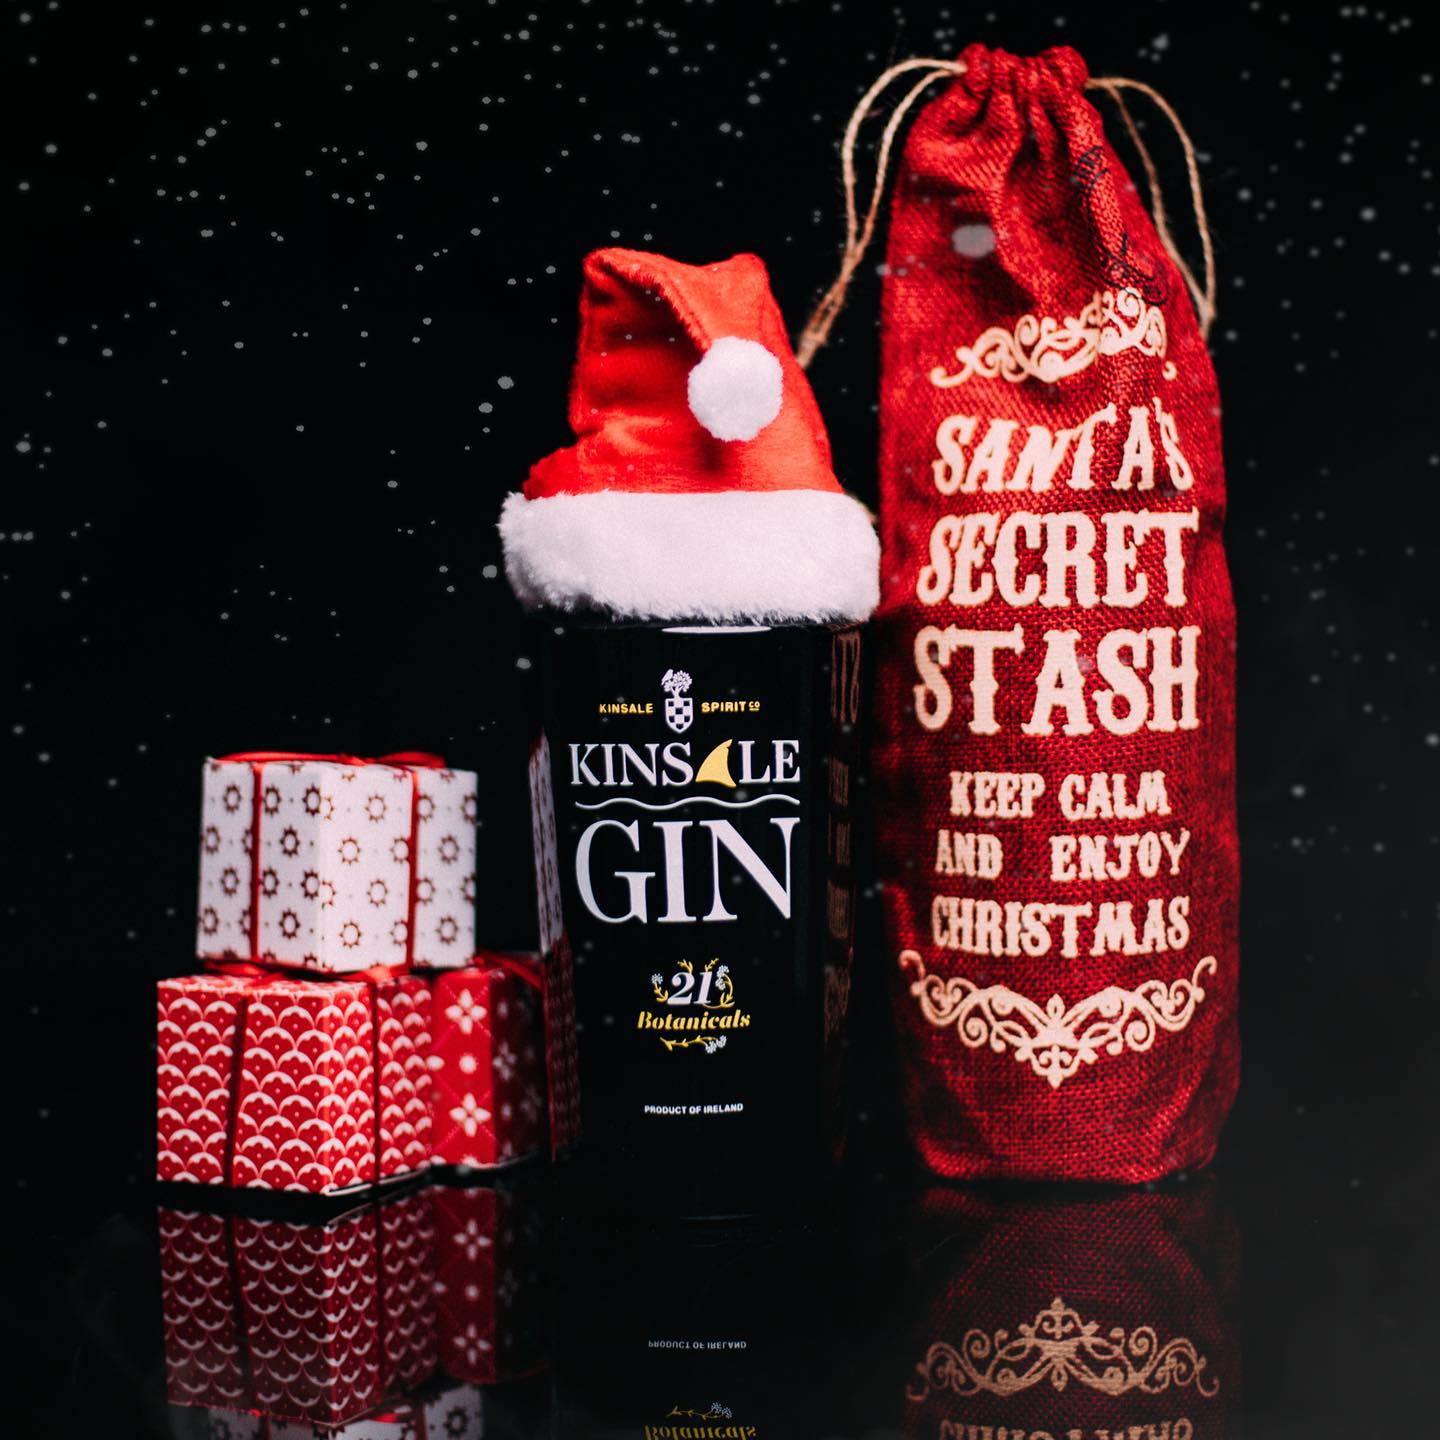 🎁🎄 Give the gift of Gin this festive season. Our multi-award winning Kinsale Gin has elegant amounts of juniper with notes of meadowsweet, elderﬂower and elderberry combining with aromas of lemon verbena and lemon geraniums.

☘️ Local botanicals are gathered seasonally and sensitively, leaving enough behind for the birds and future crops. The flavour of Kinsale Gin is truly of the Kinsale Irish countryside.

🍸 Simply look for "THE GIN WITH THE FIN" in selected off-licences, @supervalu_irl & @centra_irl stores nationwide.

📲 Learn more at: www.kinsalespirit.com

#drinkresponsibly #kinsalegin #gin #gnt #irishgin #supervalu #centra #ireland #botanicals #irish #kinsale #cork #christmas #gift #present